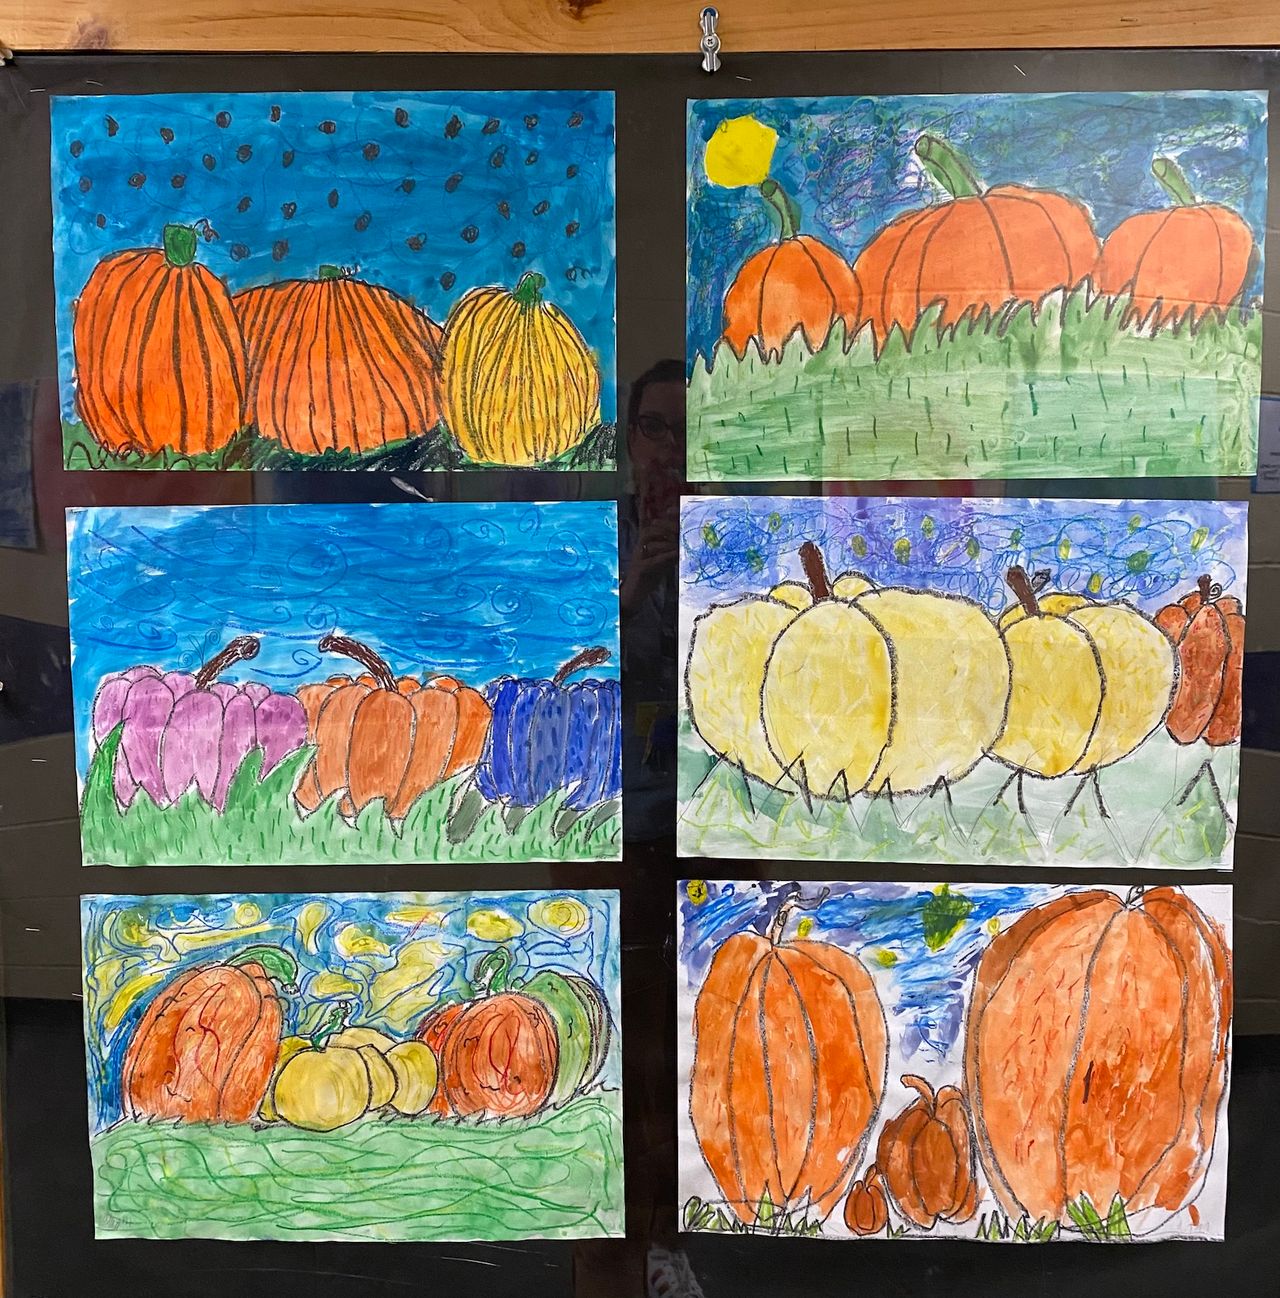 A series of 6 drawings by young artists, each one depicting pumpkins in a patch in front of a starry night. Inspired by Van Gough.